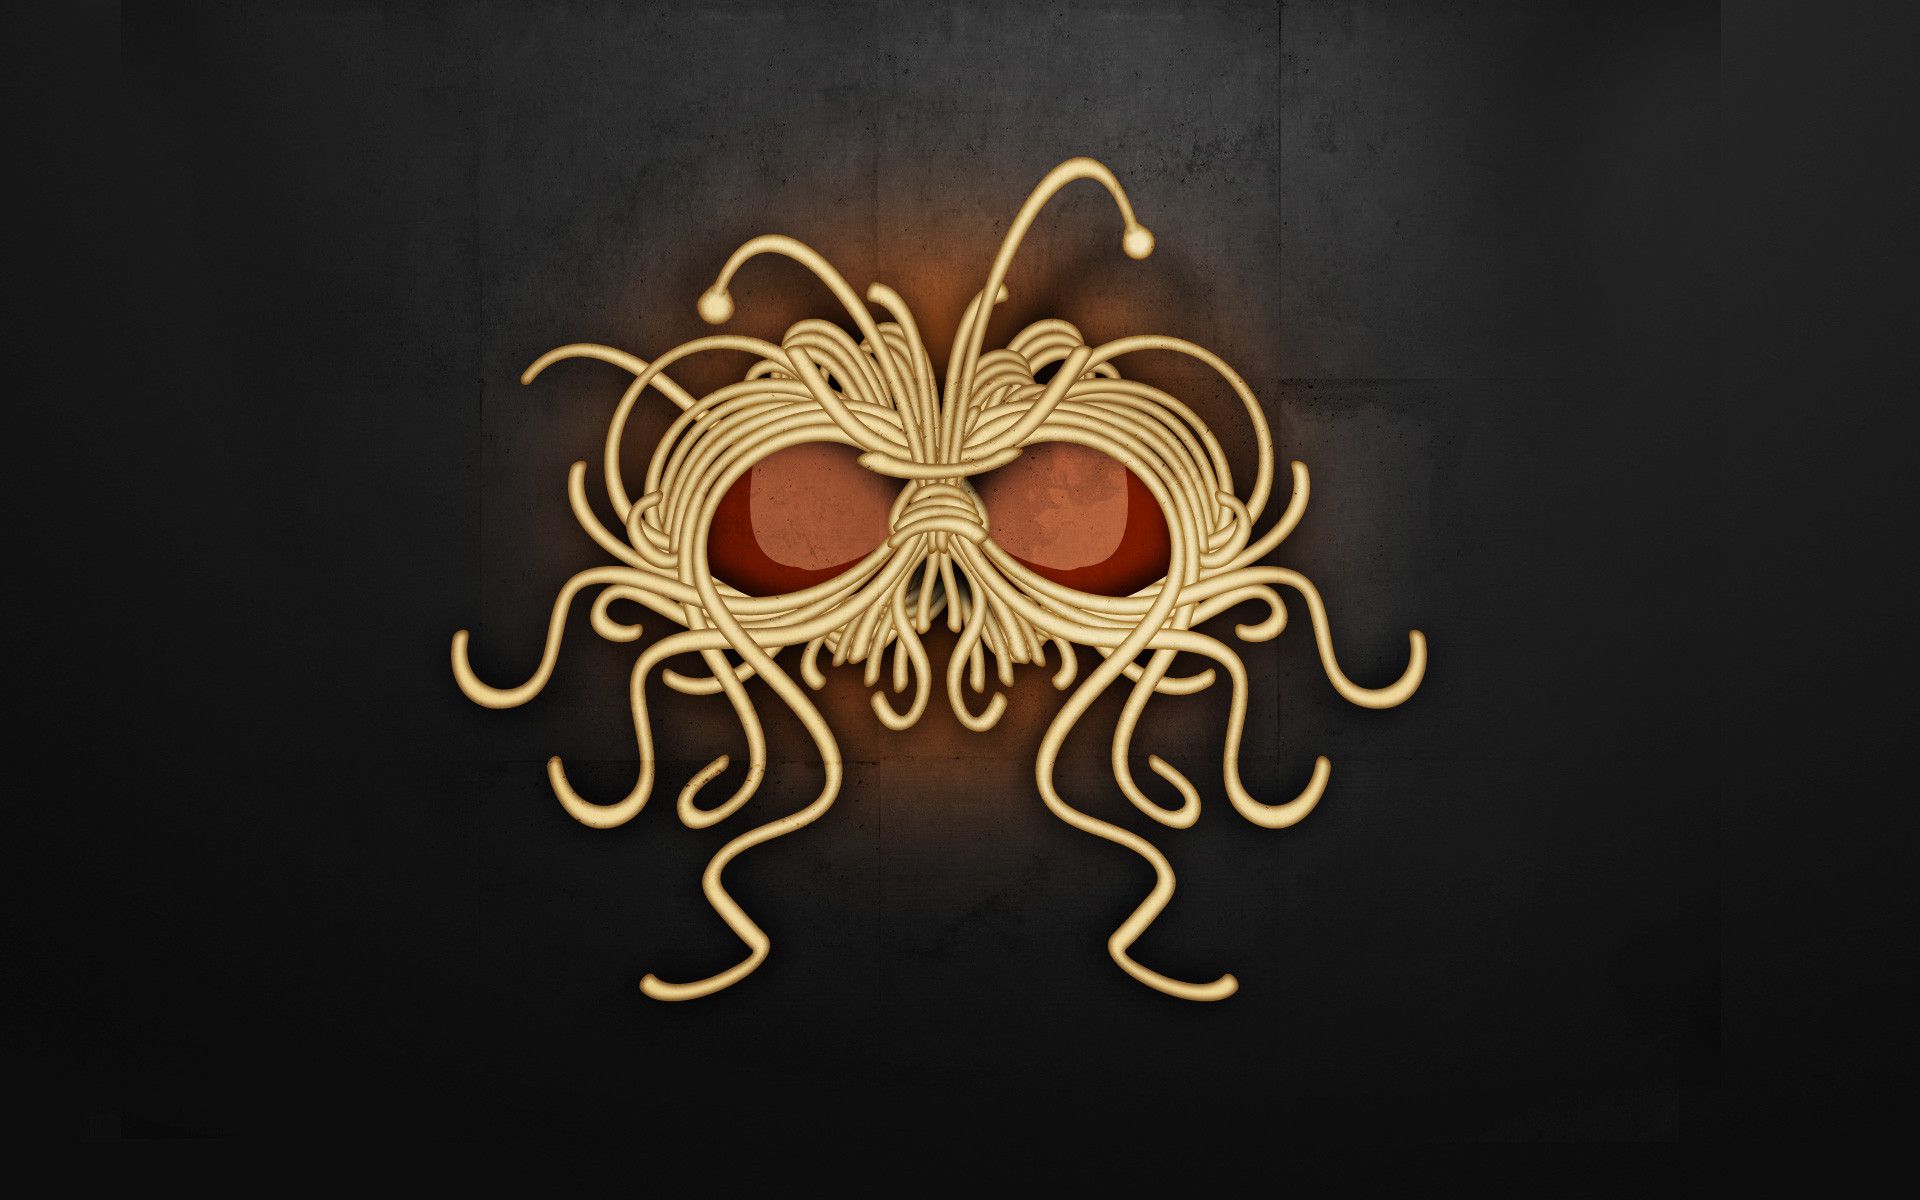 Ve Created Flying Spaghetti Monster Wallpaper Do With It What